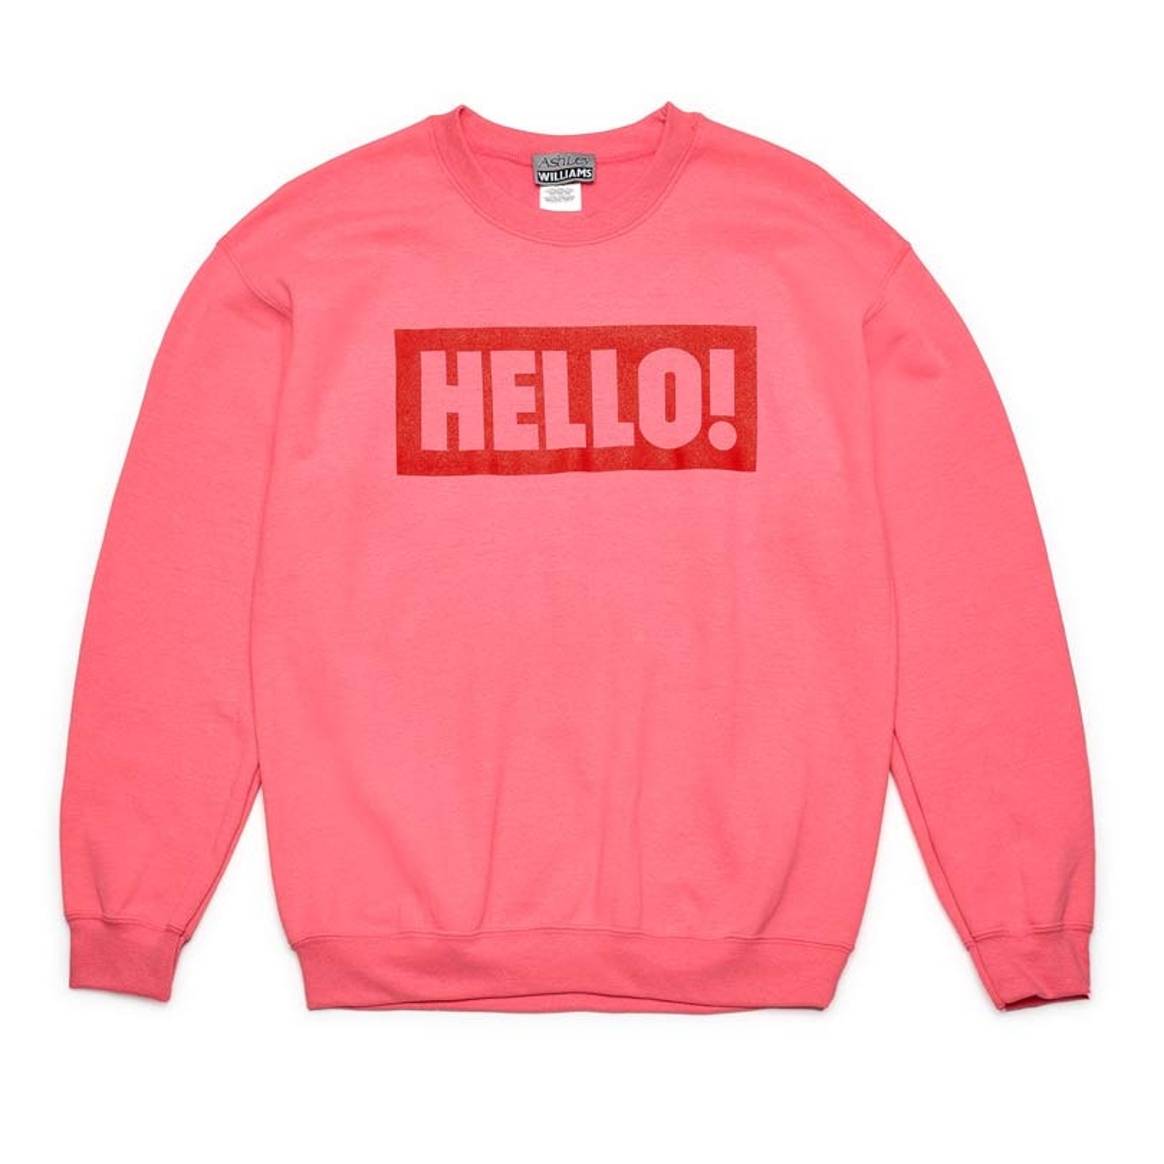 Dover Street Market collaborates with Hello!